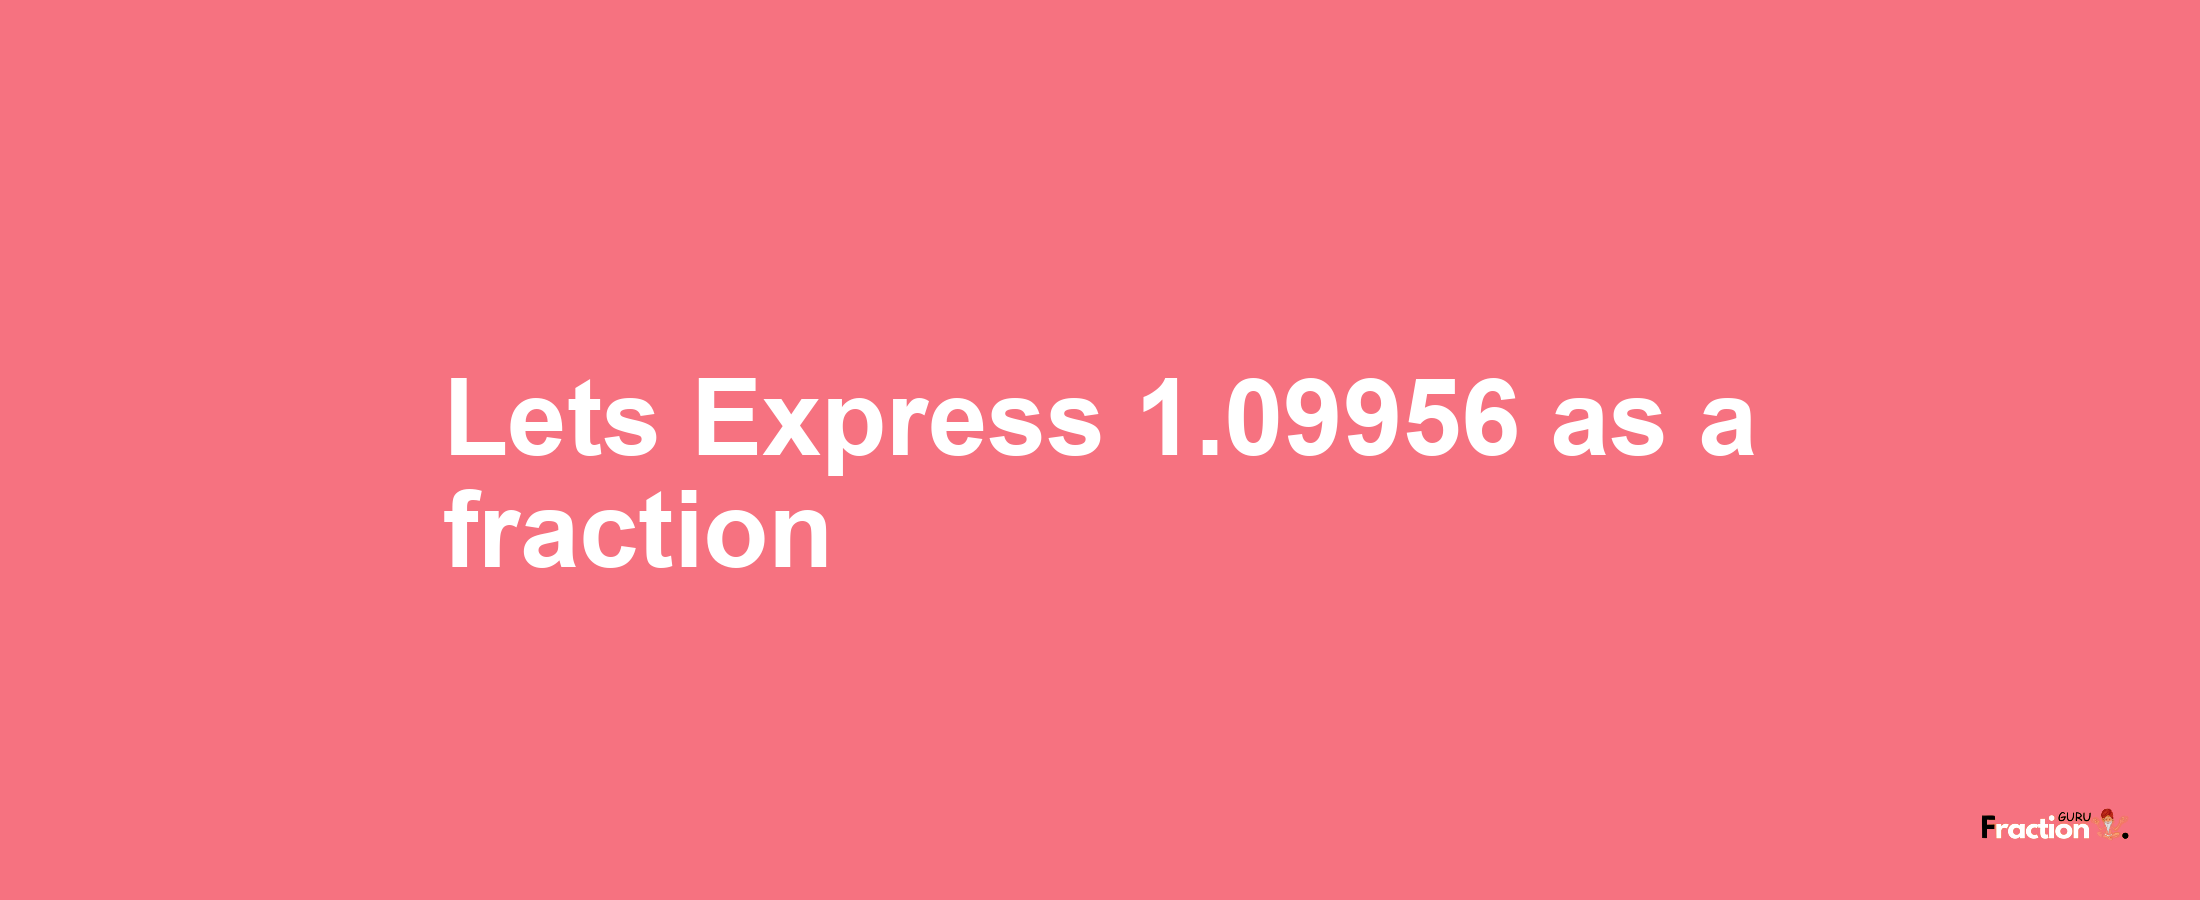 Lets Express 1.09956 as afraction